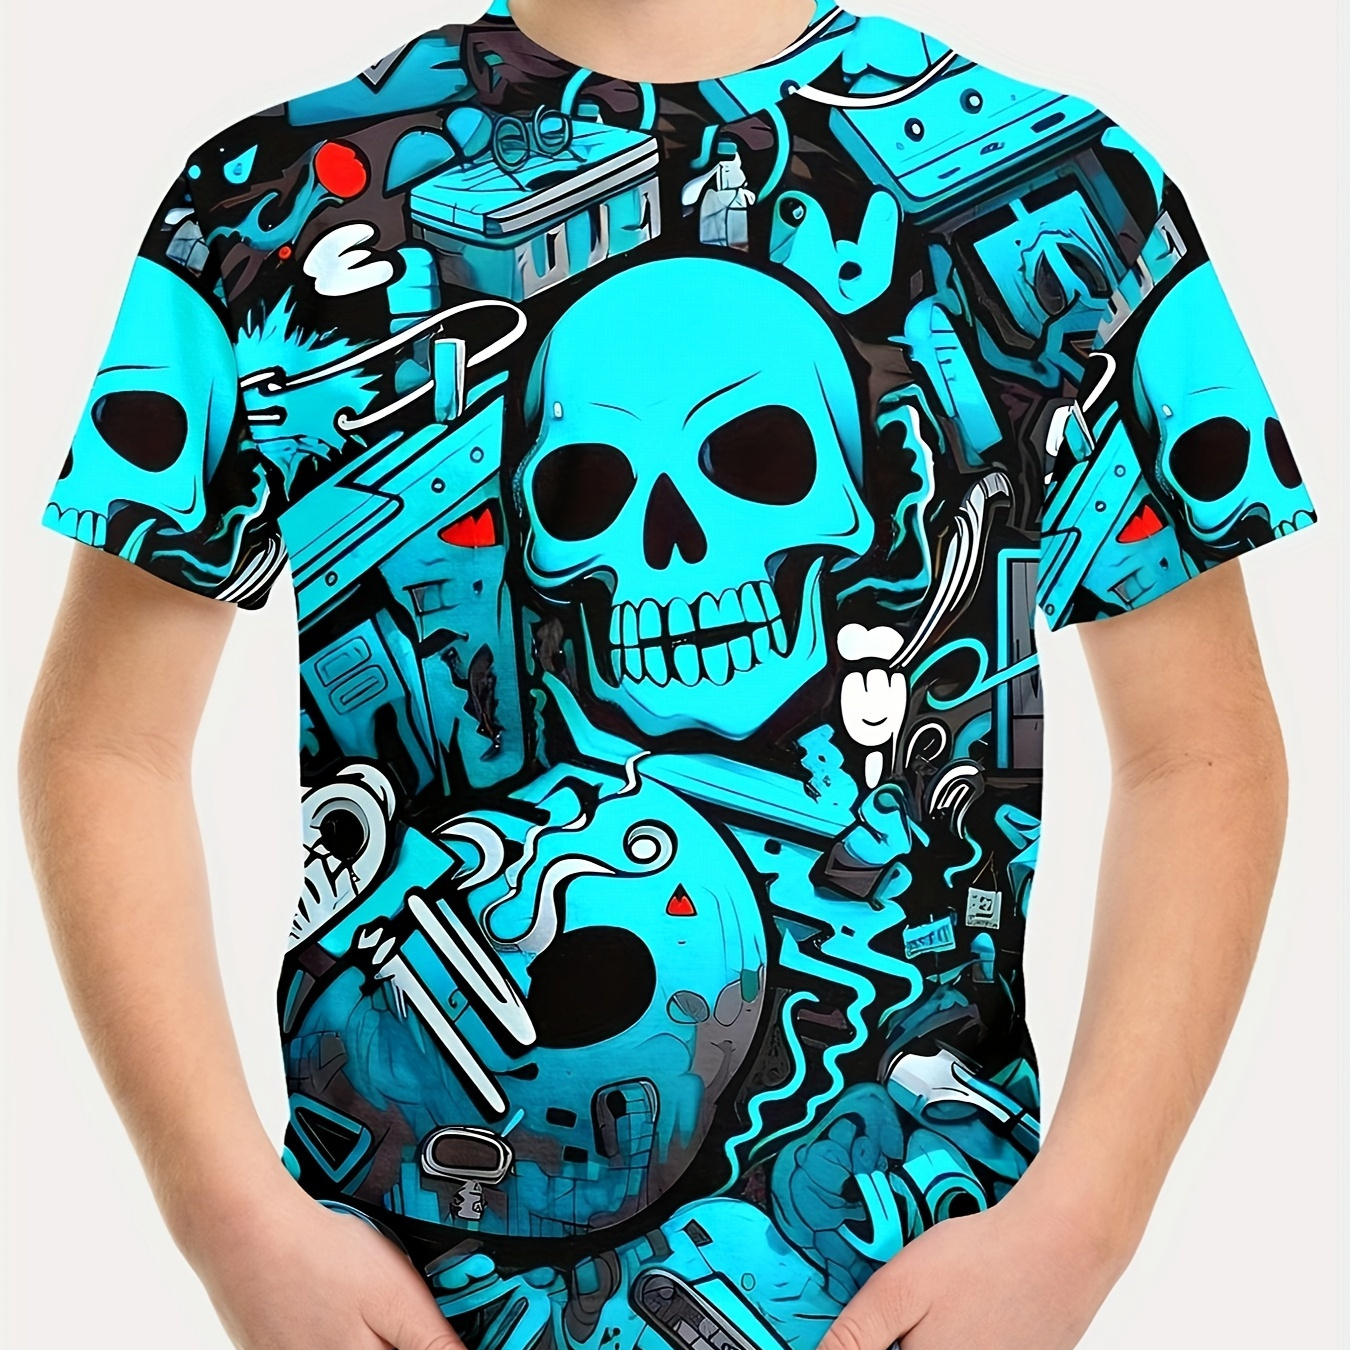 

Cool Skull 3d Print Boy's Casual T-shirt, Short Sleeve Comfy Tee Tops, Summer Outdoor Sports Clothing